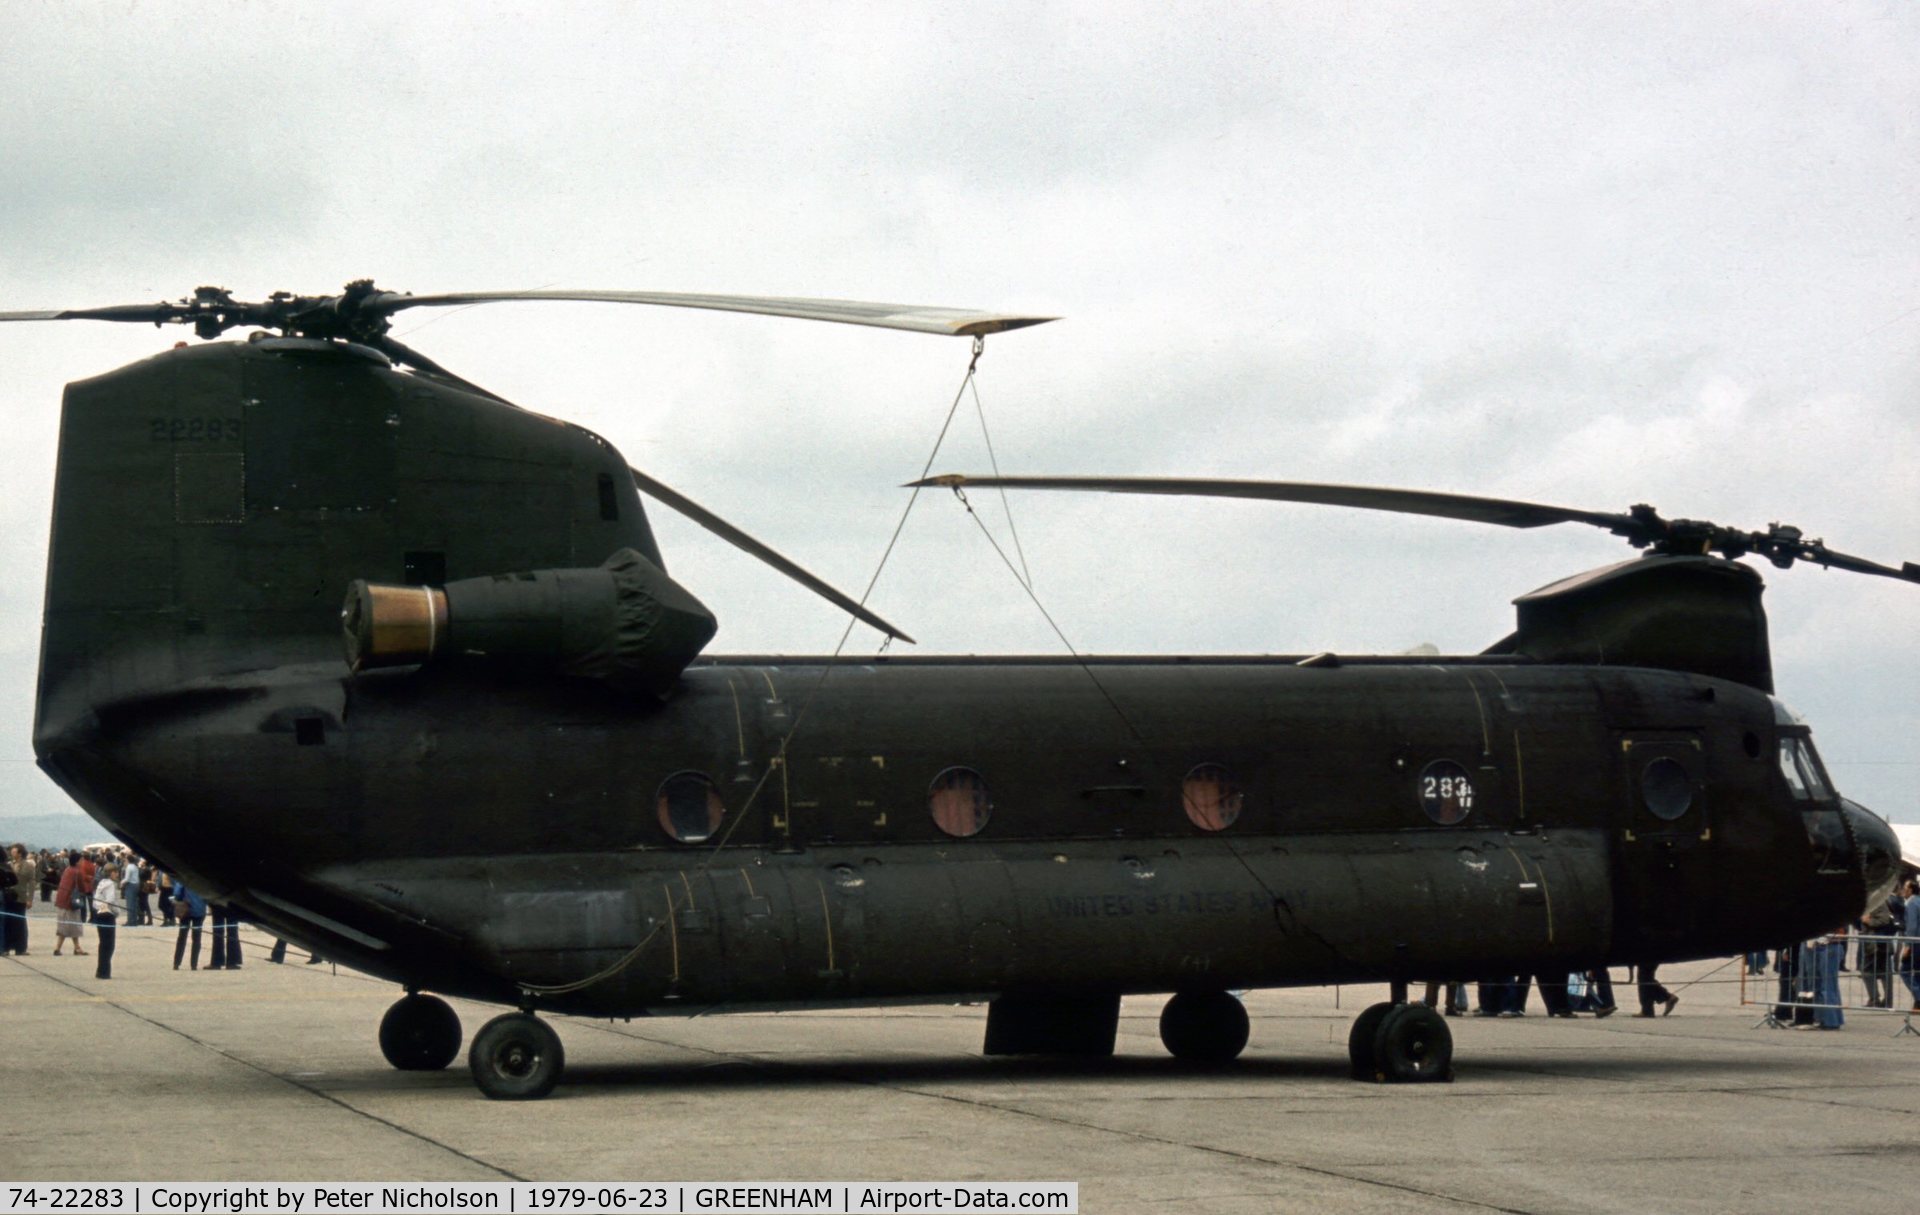 74-22283, 1974 Boeing Vertol CH-47C Chinook C/N B.702, CH-47C Chinook of the US Army's 295 Aviation Company at the 1979 Intnl Air Tattoo at RAF Greenham Common.